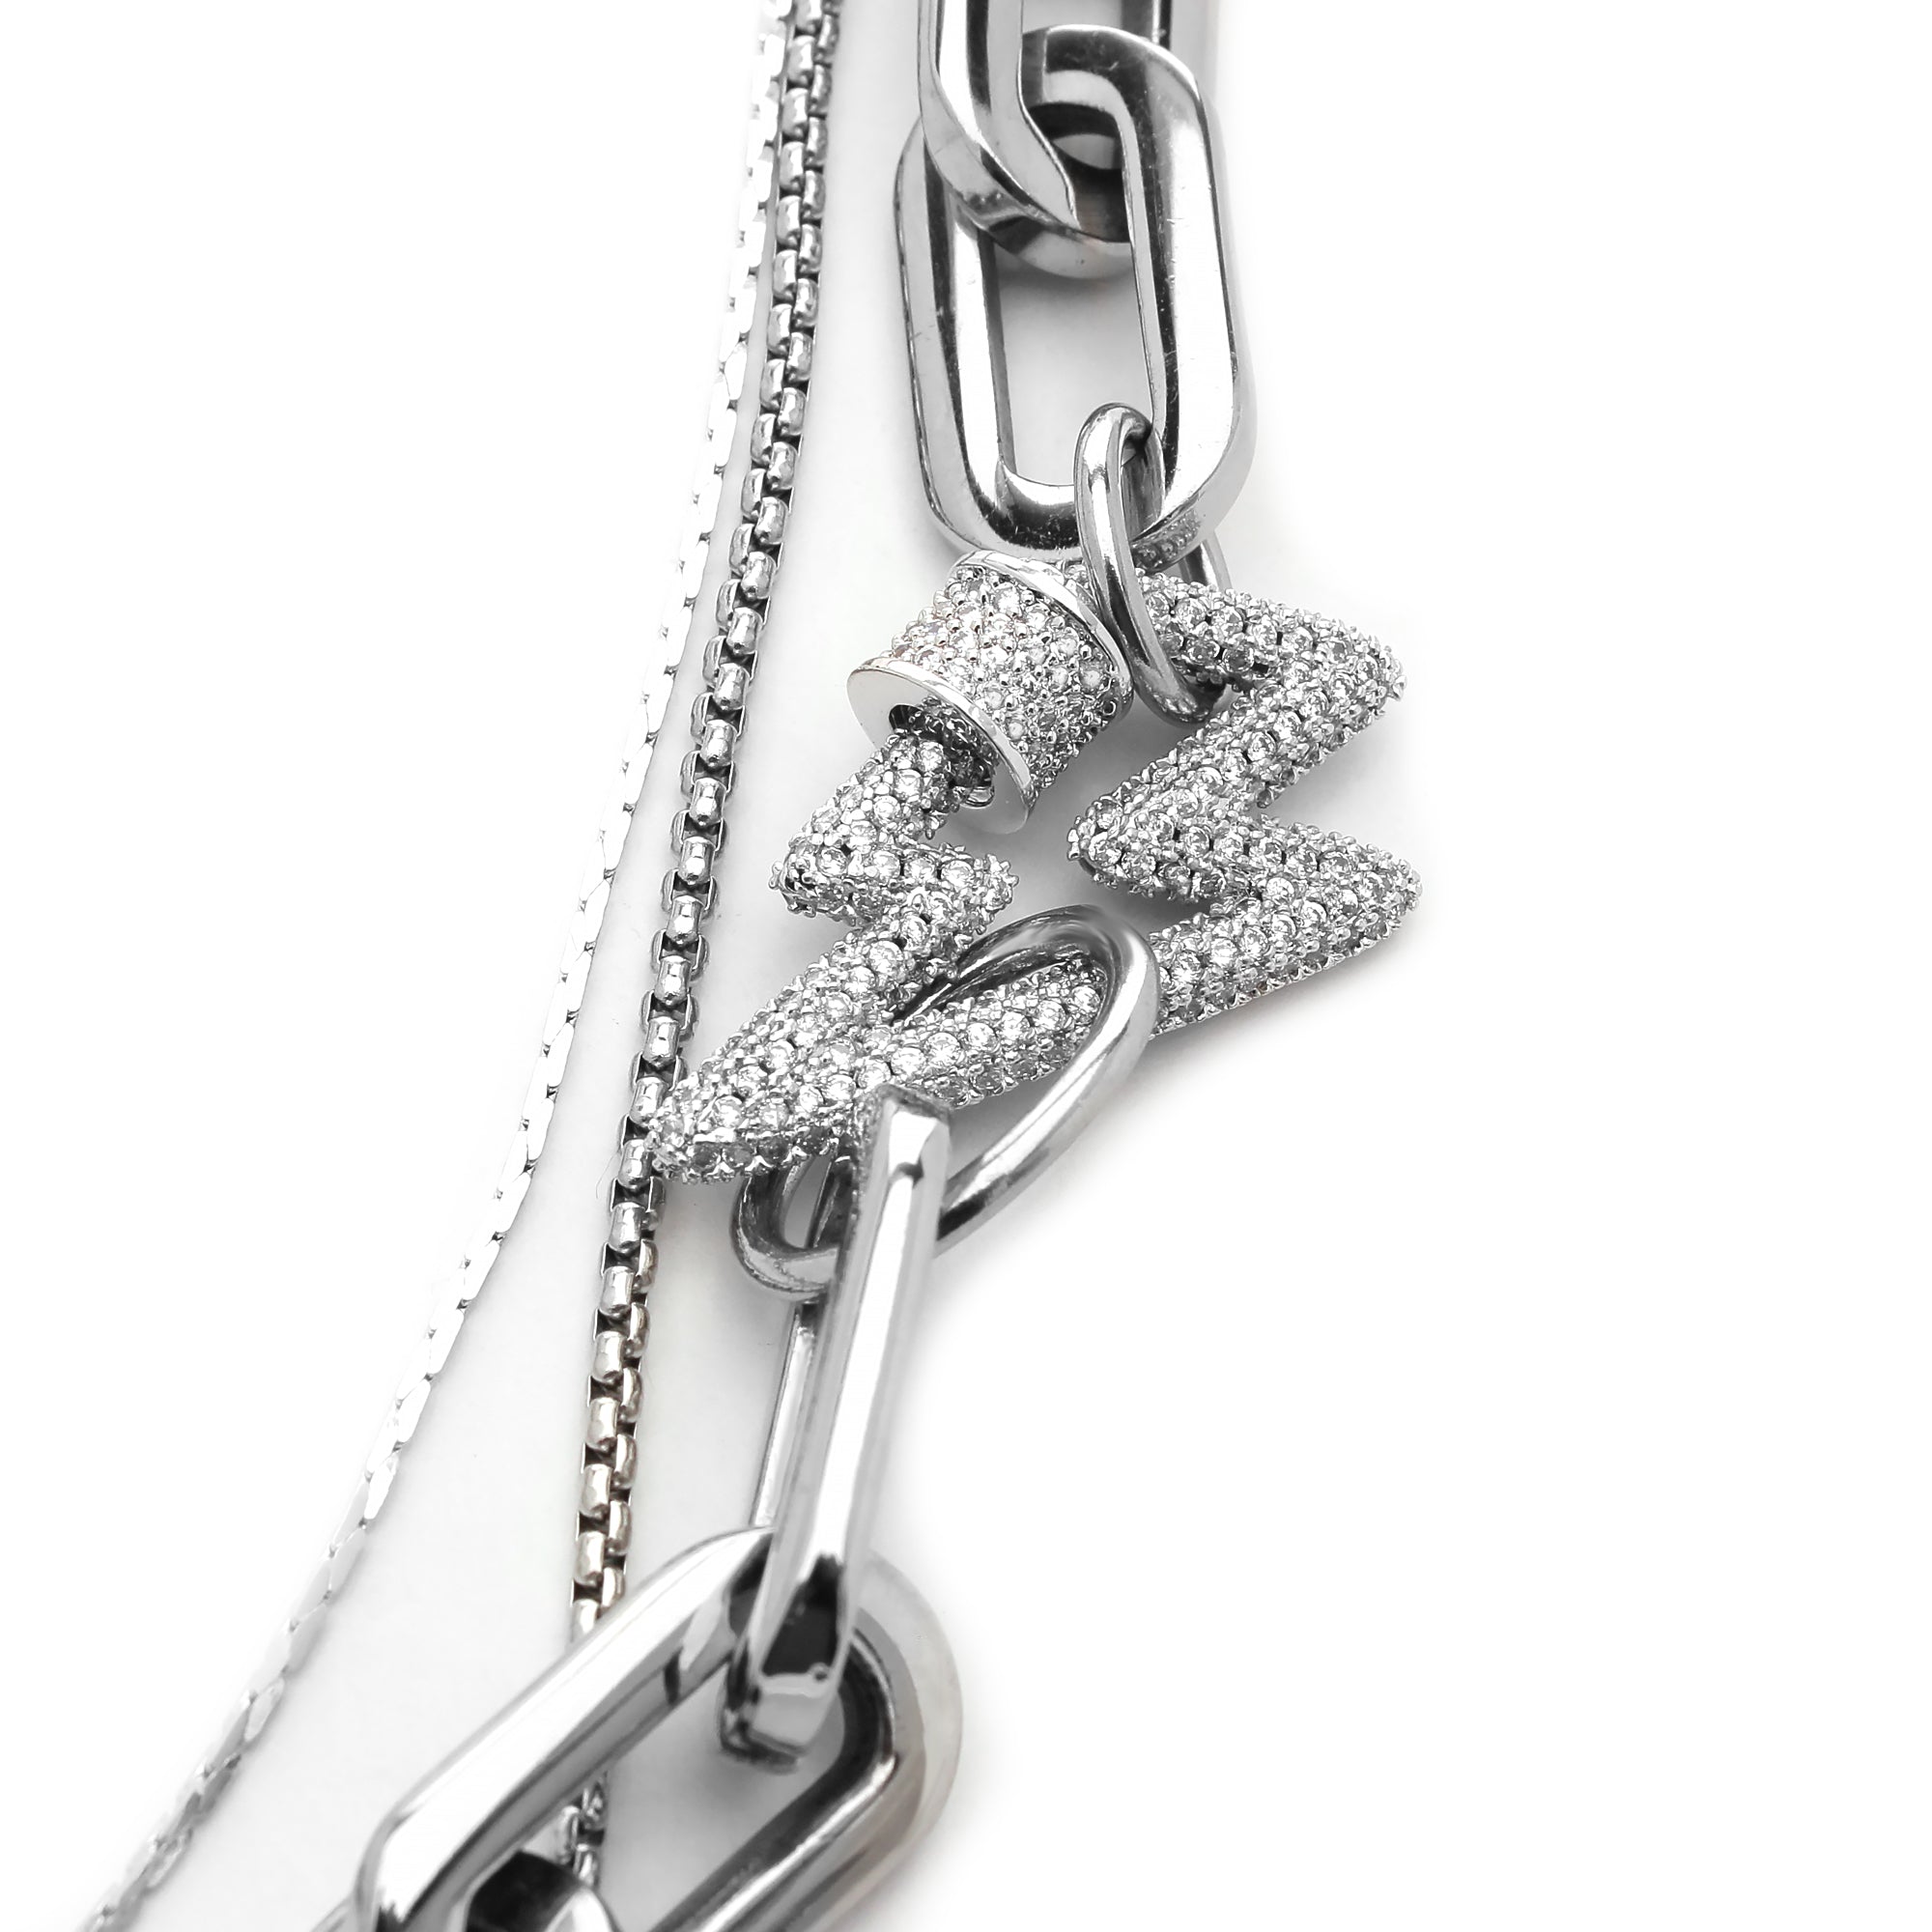 Louis Vuitton Style Chunky Chain Link Jewelry Set